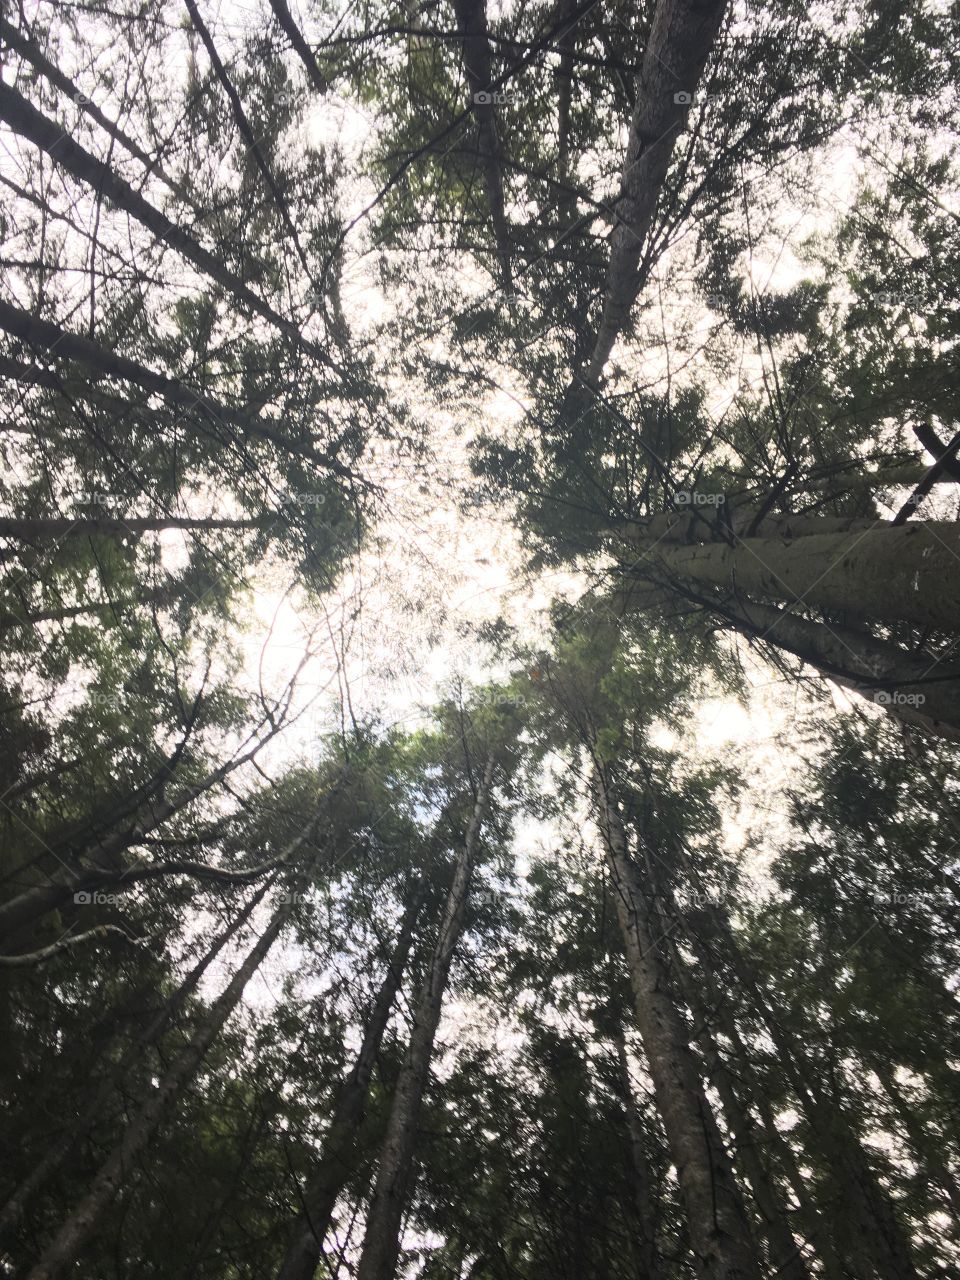 Looking up through the forest 